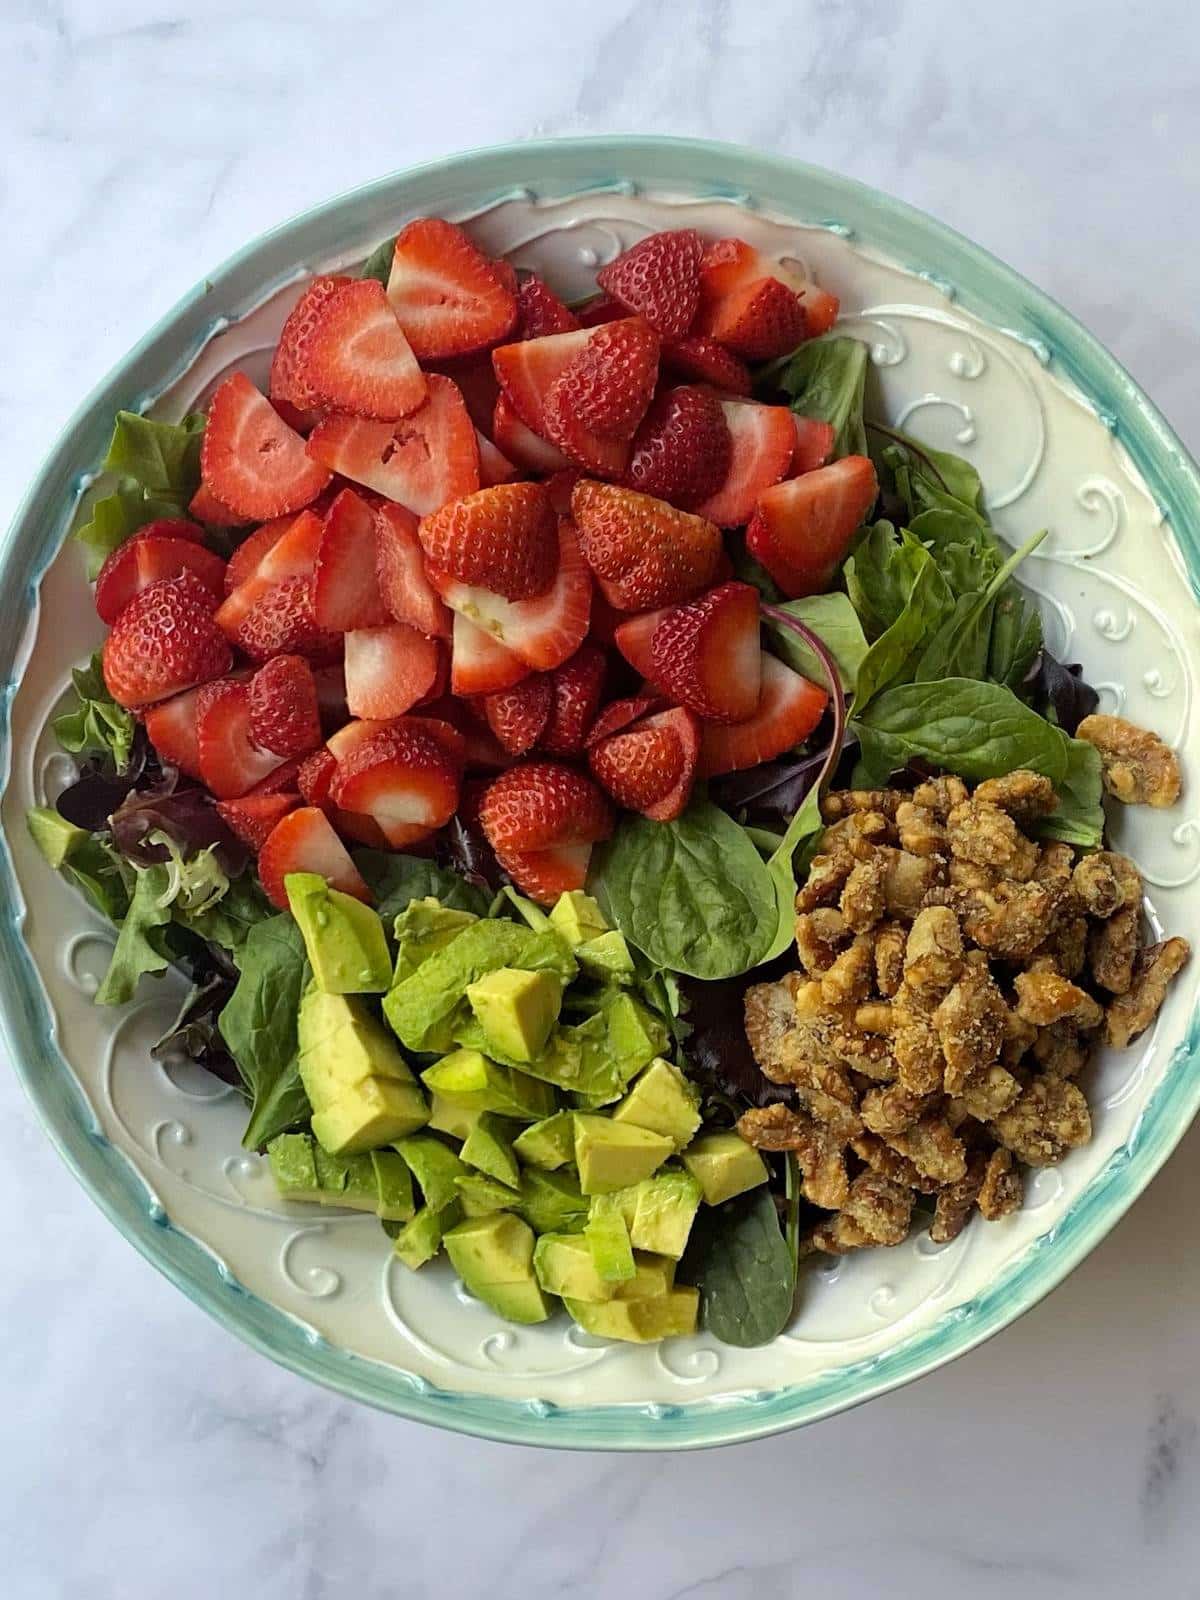 A bowl of lettuce topped with strawberries, avocado, and candied walnuts before tossing.